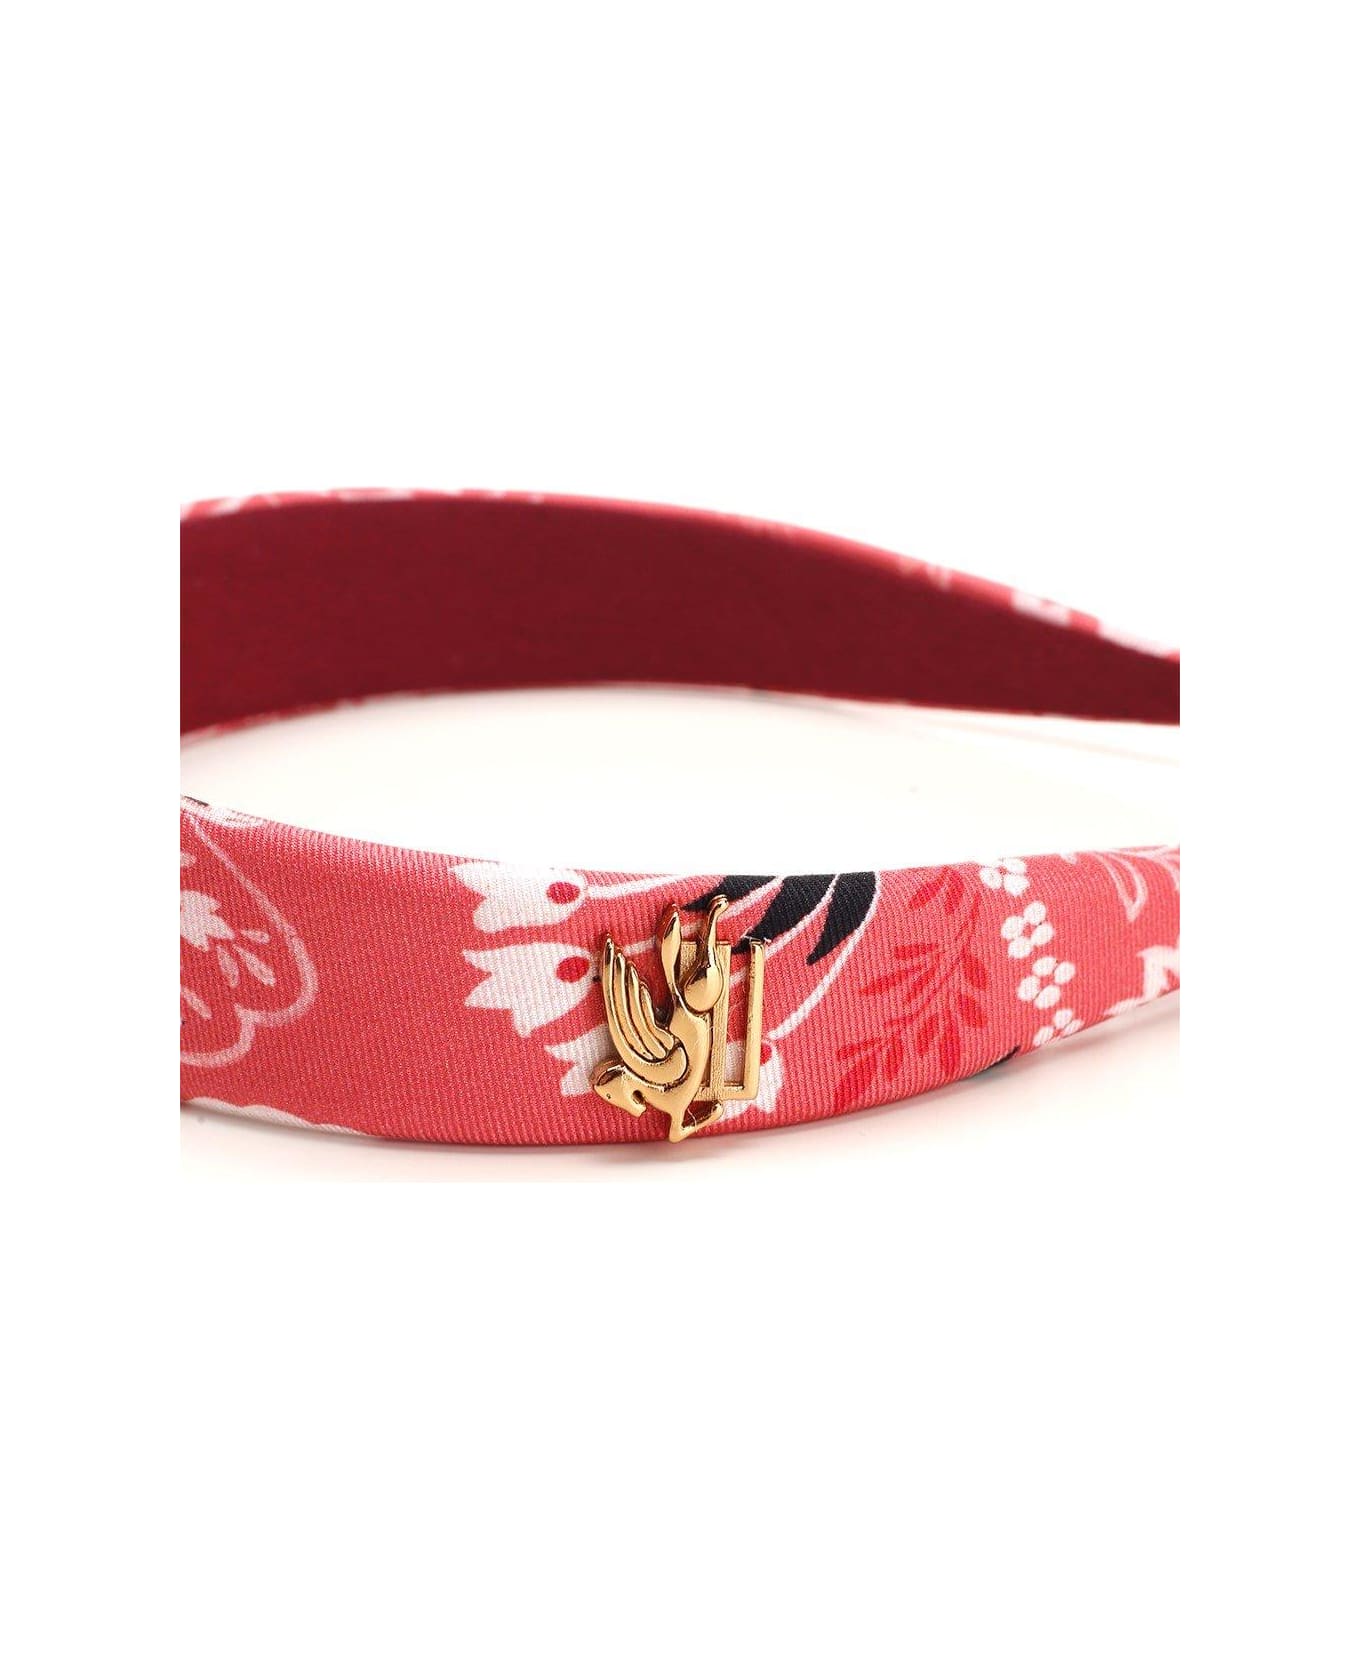 Etro Pegaso Plaque Floral Printed Hairband - PINK